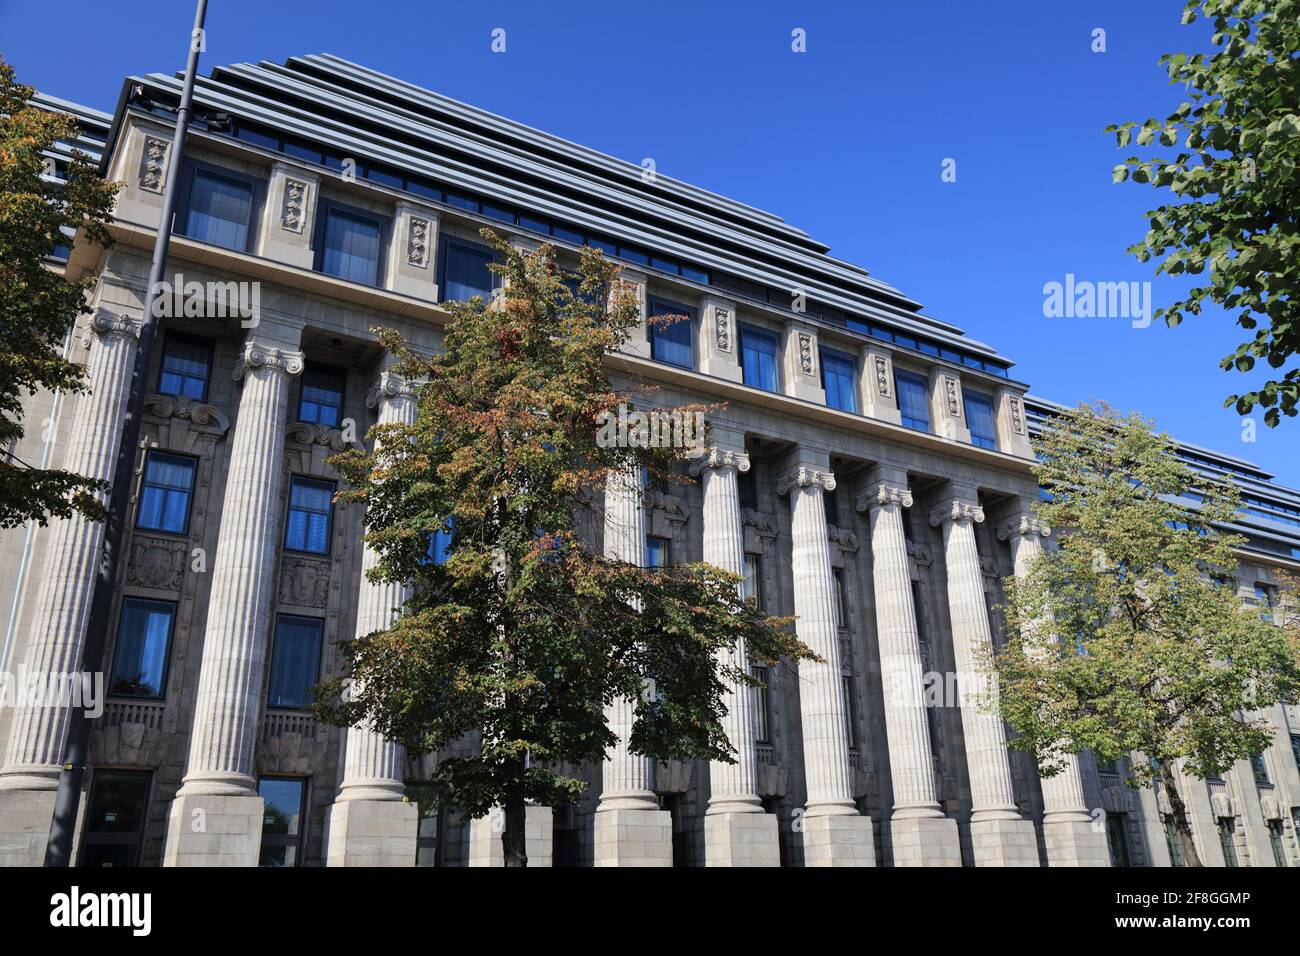 European Aviation Safety Agency (EASA) head office in Cologne, Germany. Stock Photo